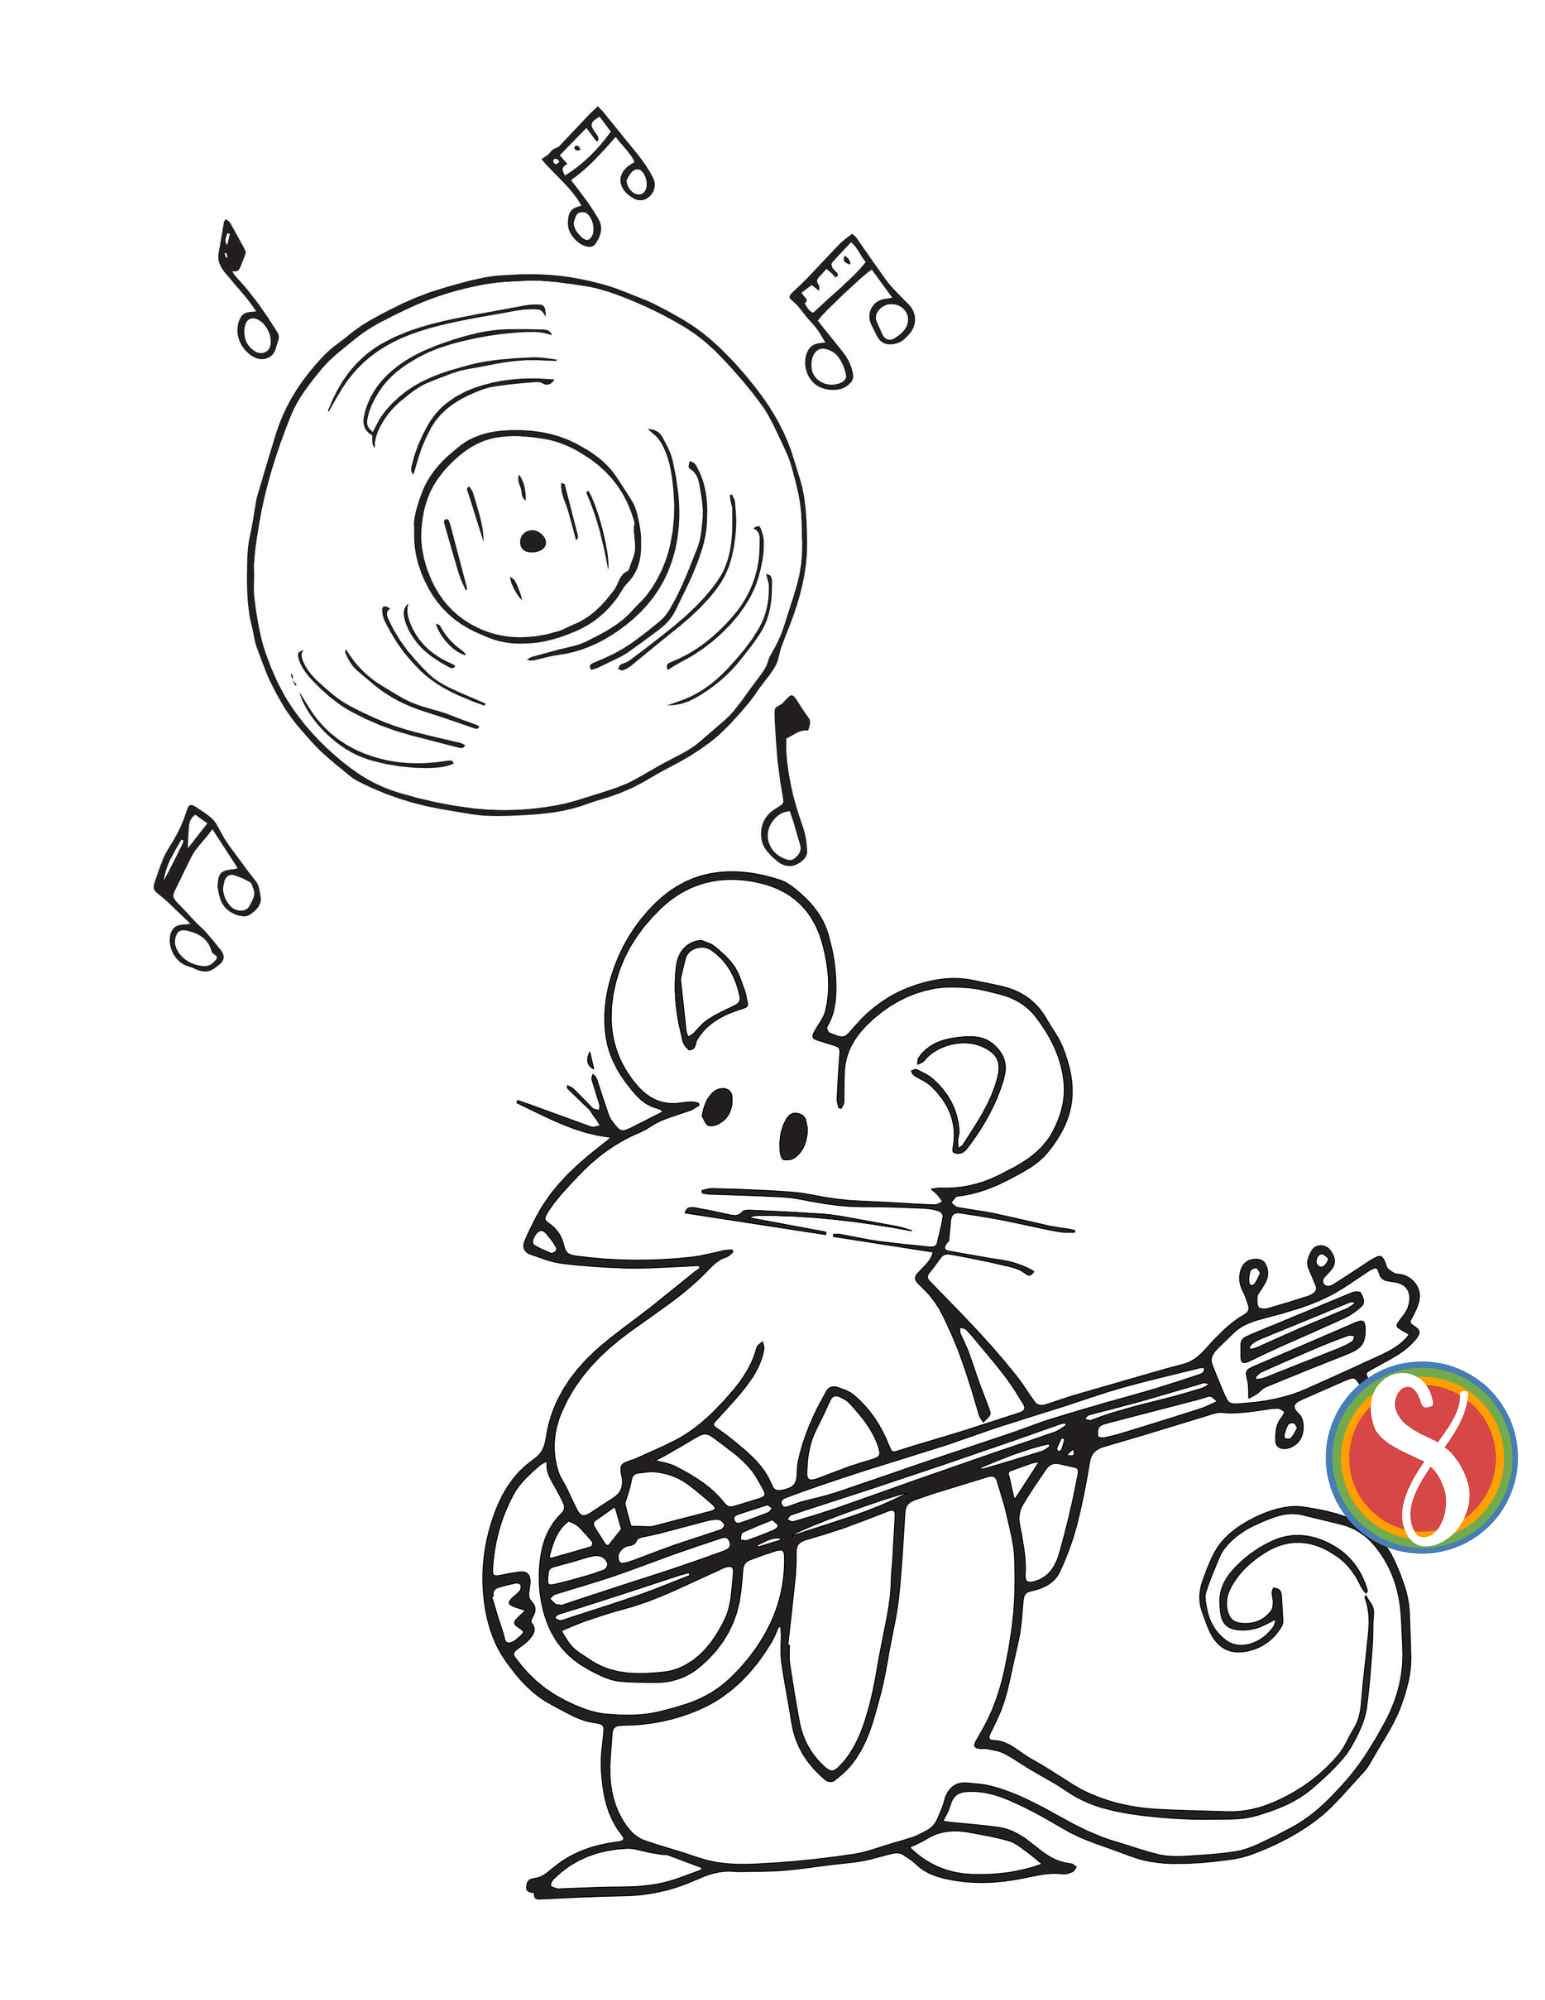 mouse coloring page, mouse playing mandolin, record, music notes